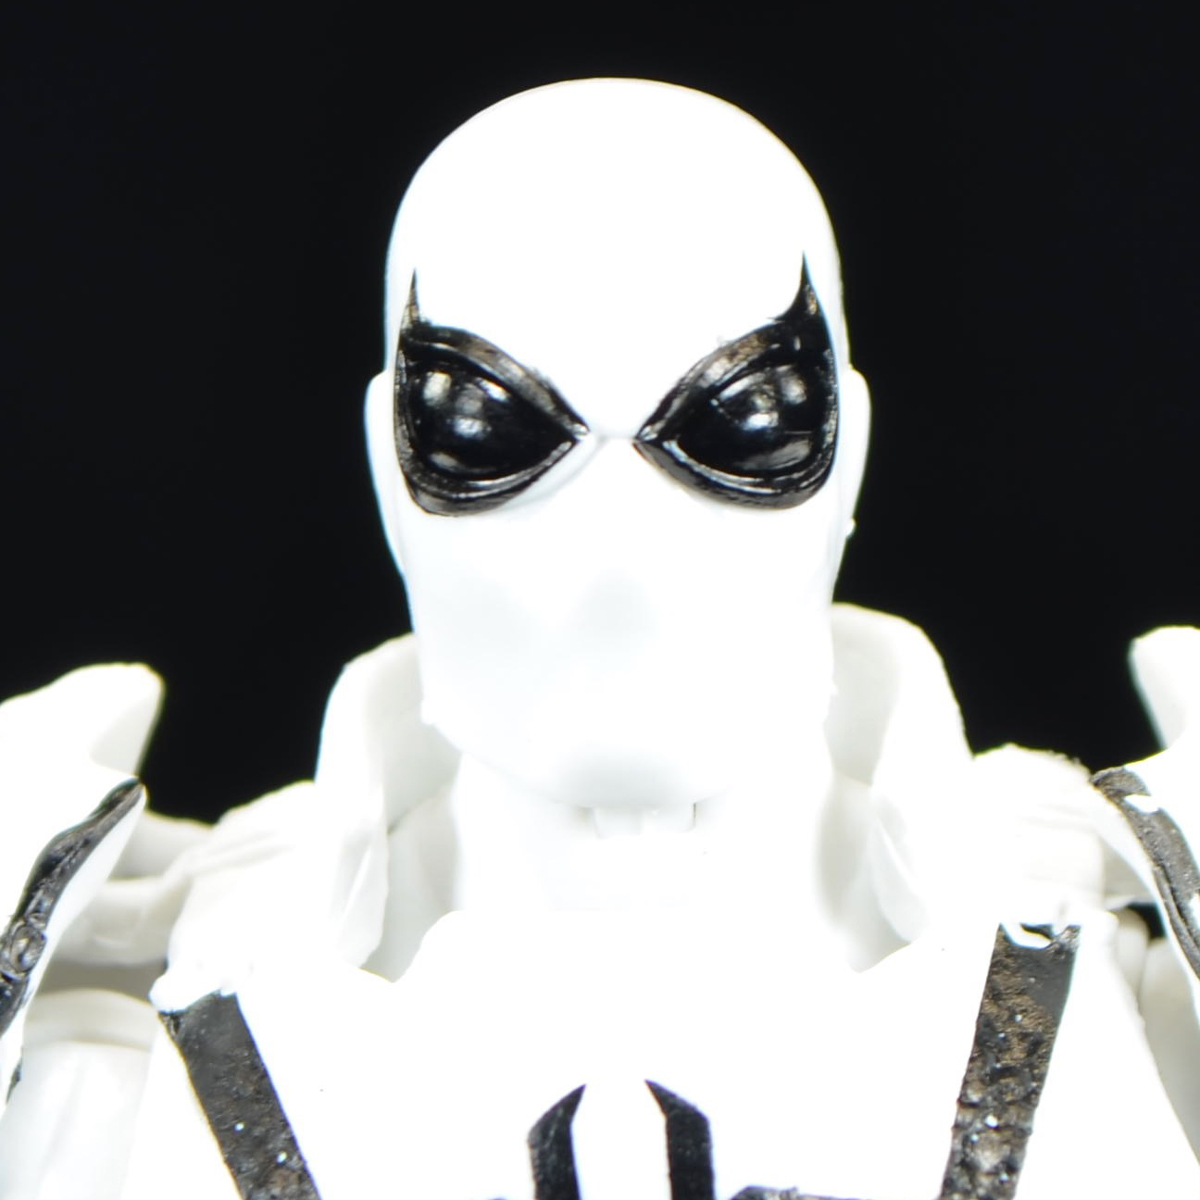 Hasbro Marvel Legends Fan Channel Exclusive Punisher And Agent Anti Venom Review Fwoosh